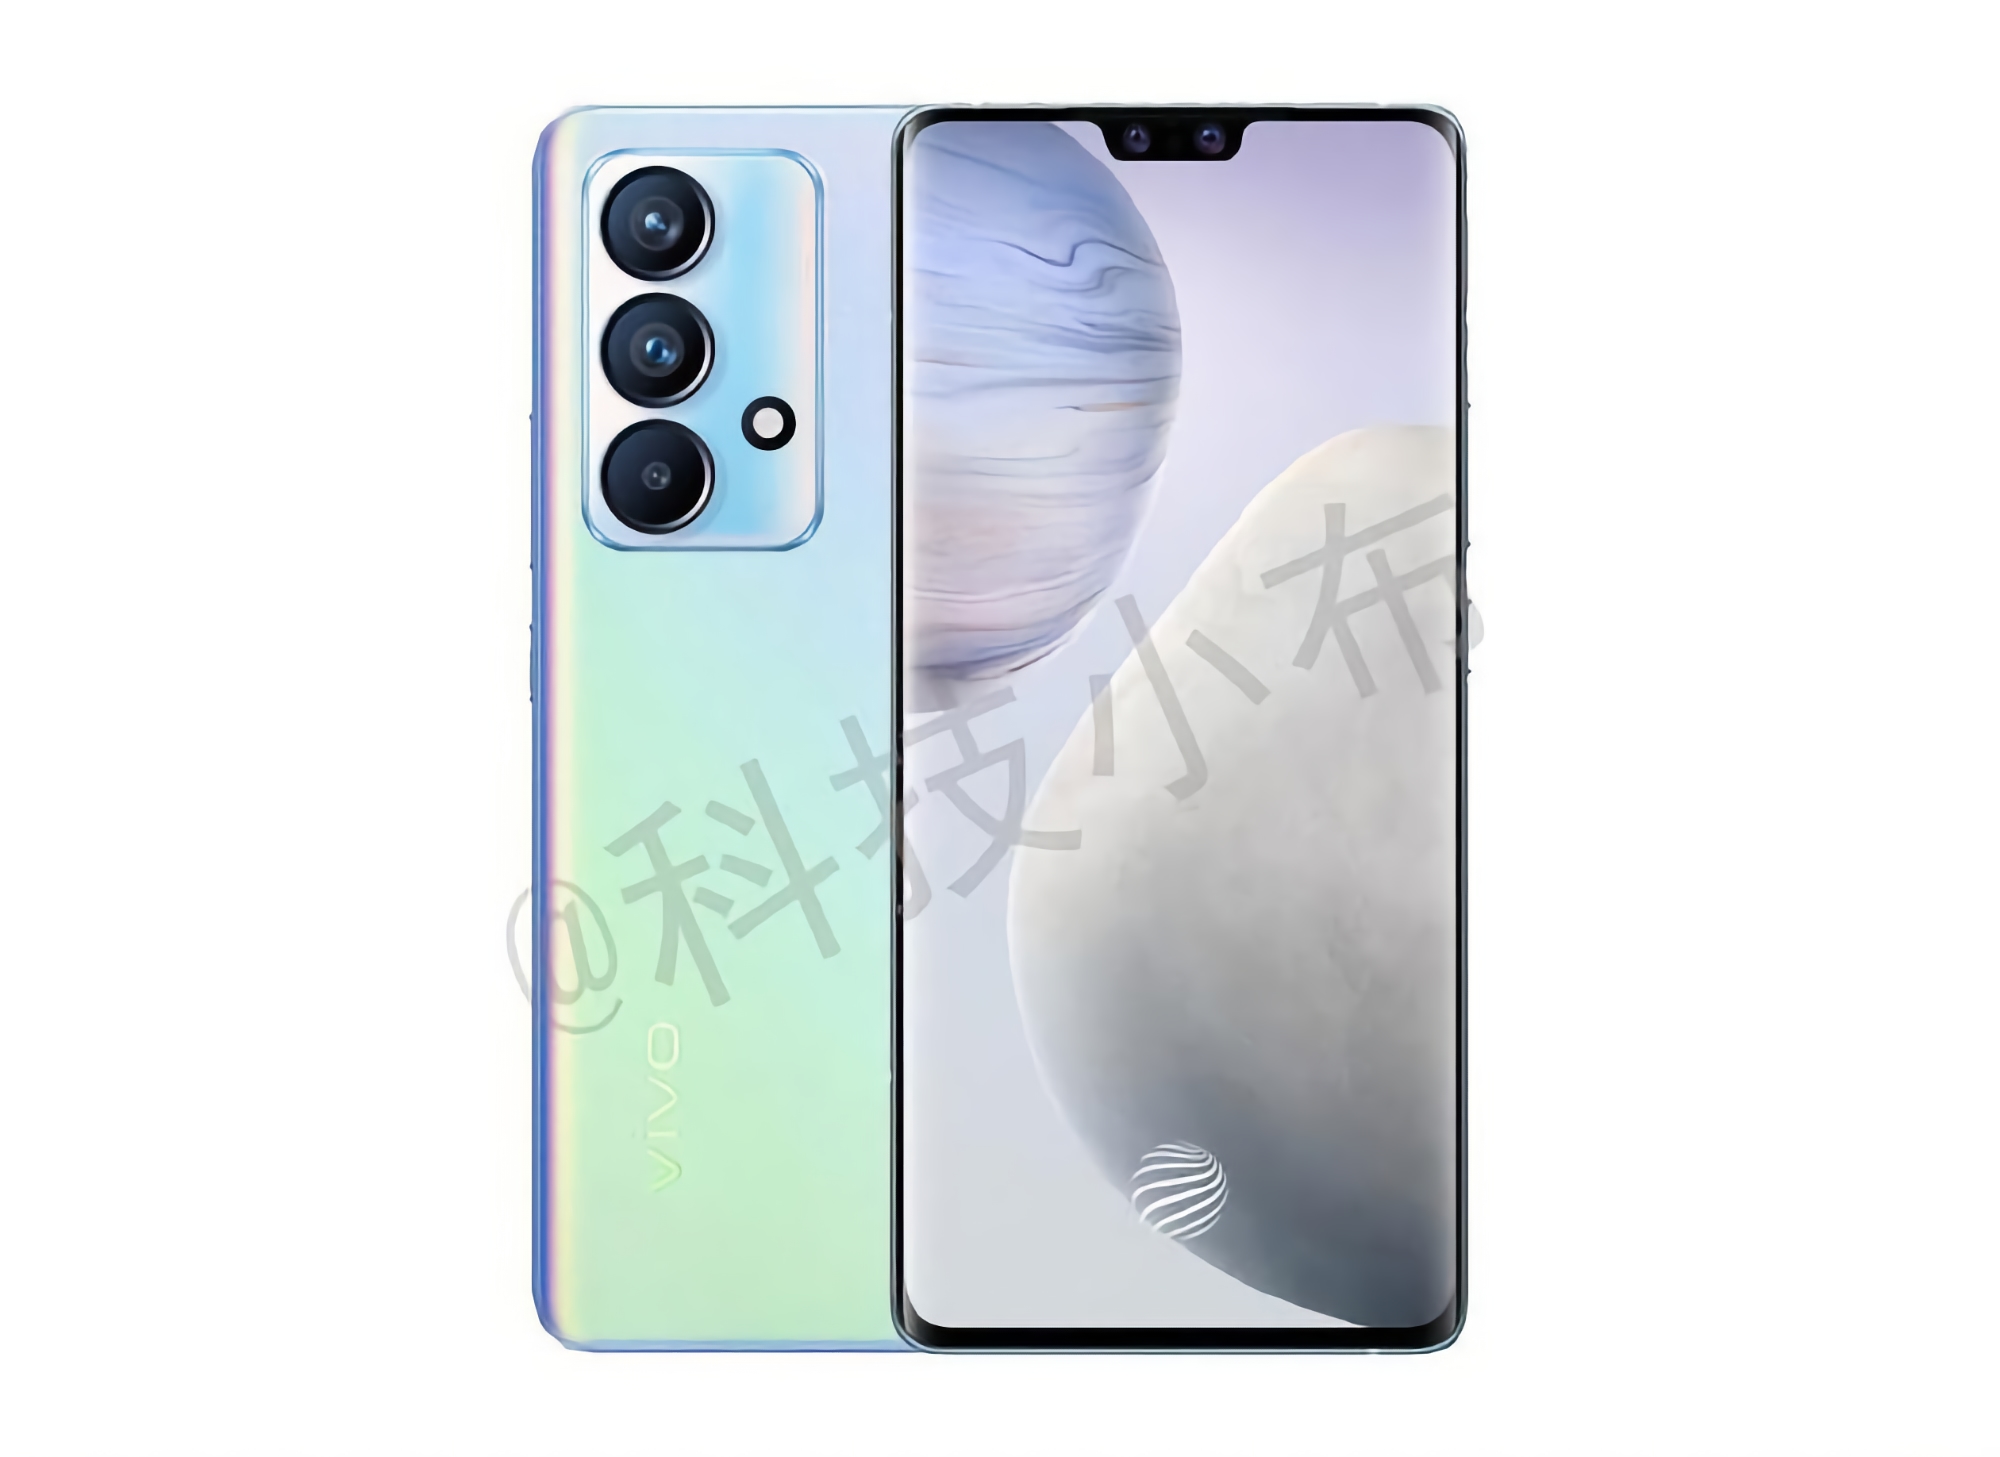 Vivo S12 Pro declassified before the announcement: MediaTek Dimensity 1200 chip, 108 MP main camera and 50 MP dual front cameras